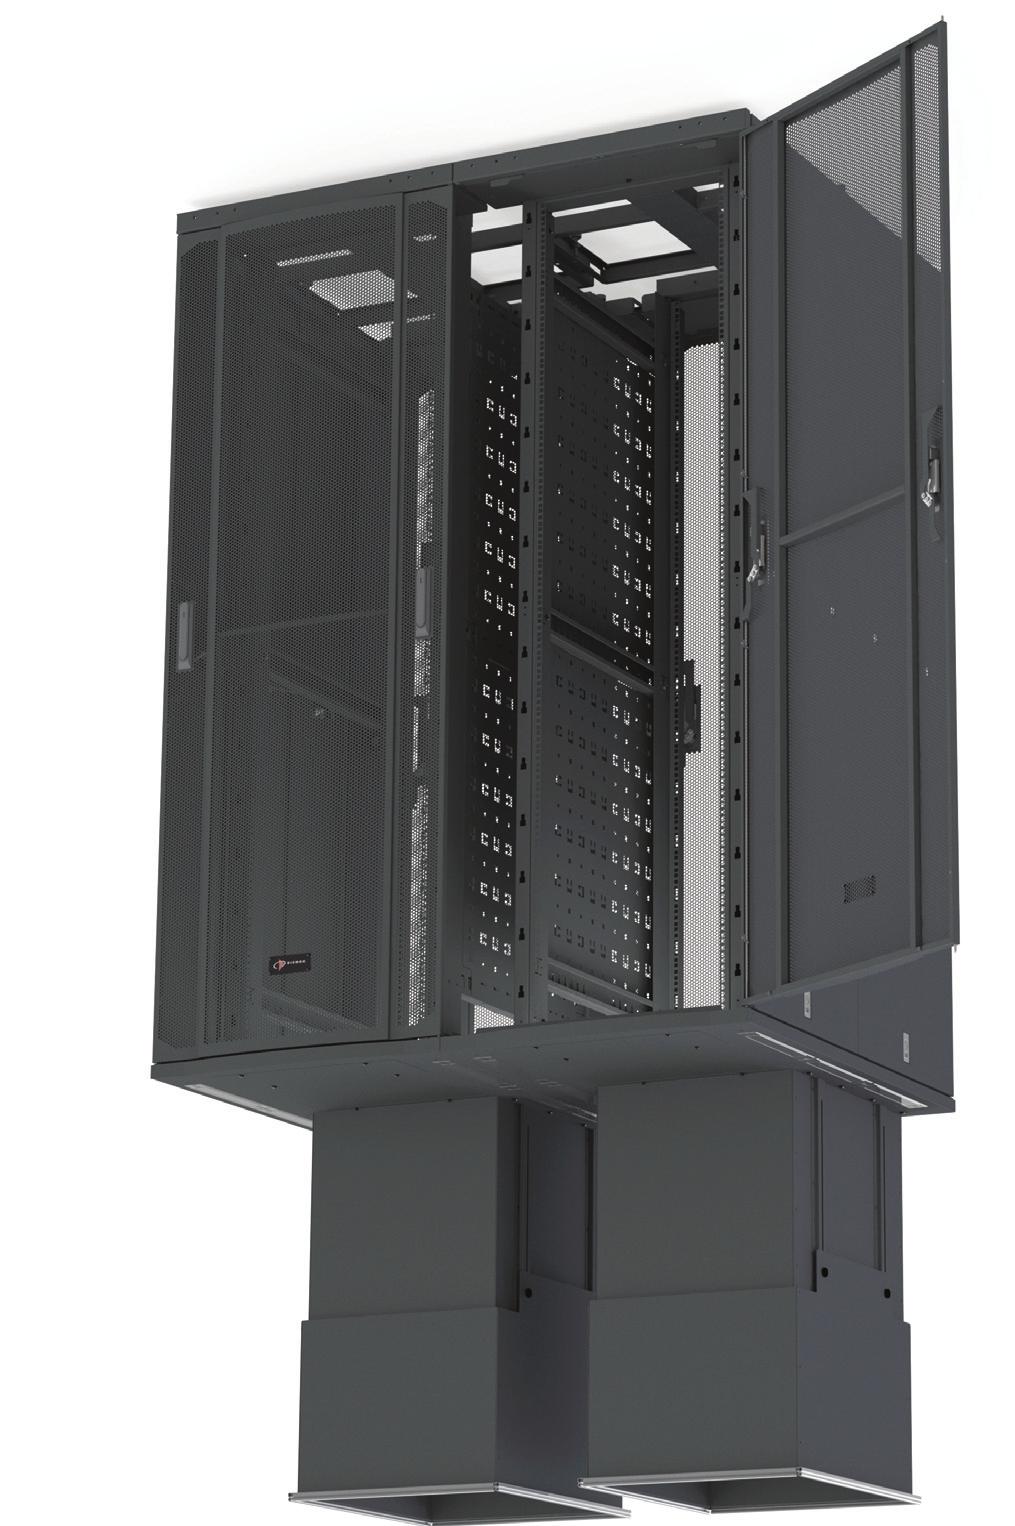 8 Efficiency & Thermal Management Solutions With energy costs continuing to rise, Siemon s cabinet solutions are designed with